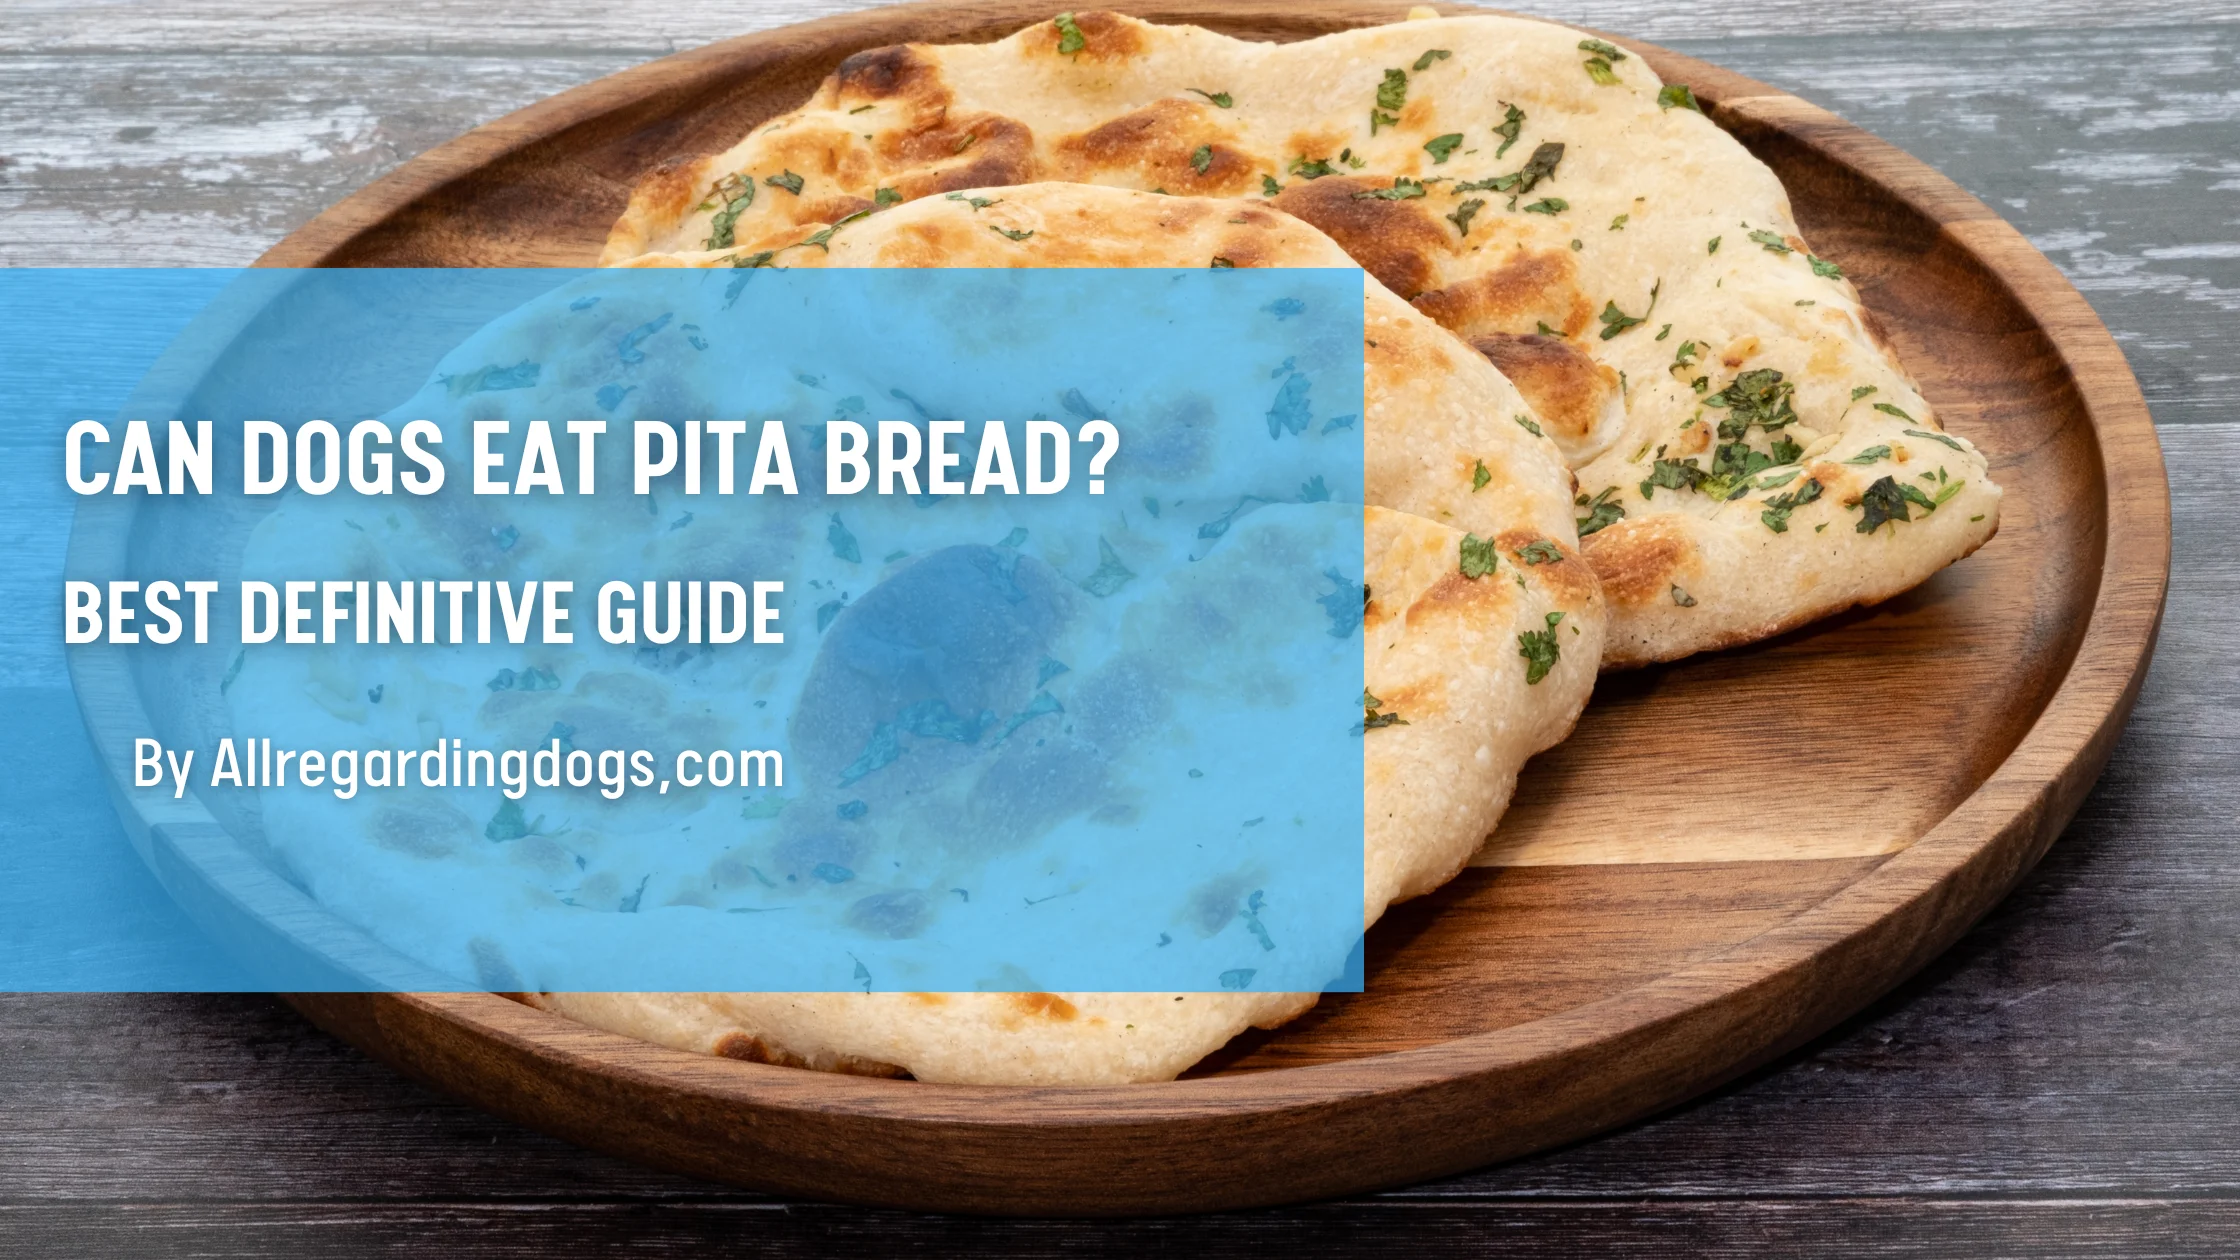 Can dogs eat pita bread